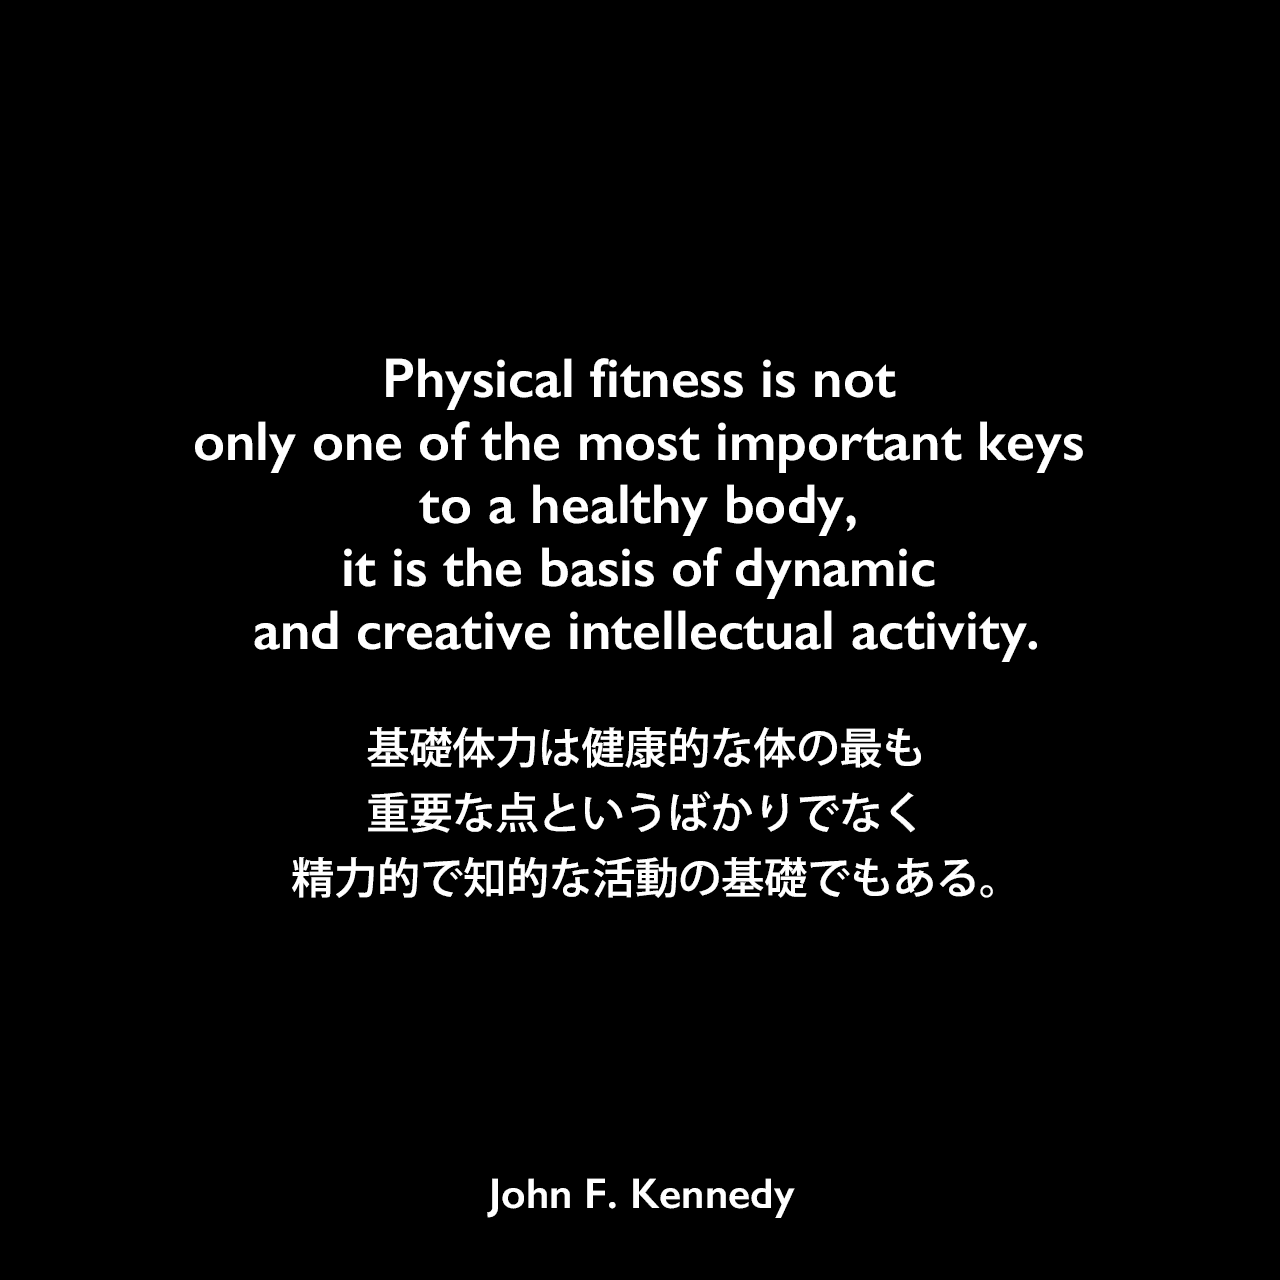 Physical fitness is not only one of the most important keys to a healthy body, it is the basis of dynamic and creative intellectual activity.基礎体力は健康的な体の最も重要な点というばかりでなく、精力的で知的な活動の基礎でもある。- スポーツ・イラストレイテッド誌に寄せたケネディの原稿「Sport at the New Frontier」よりJohn F Kennedy